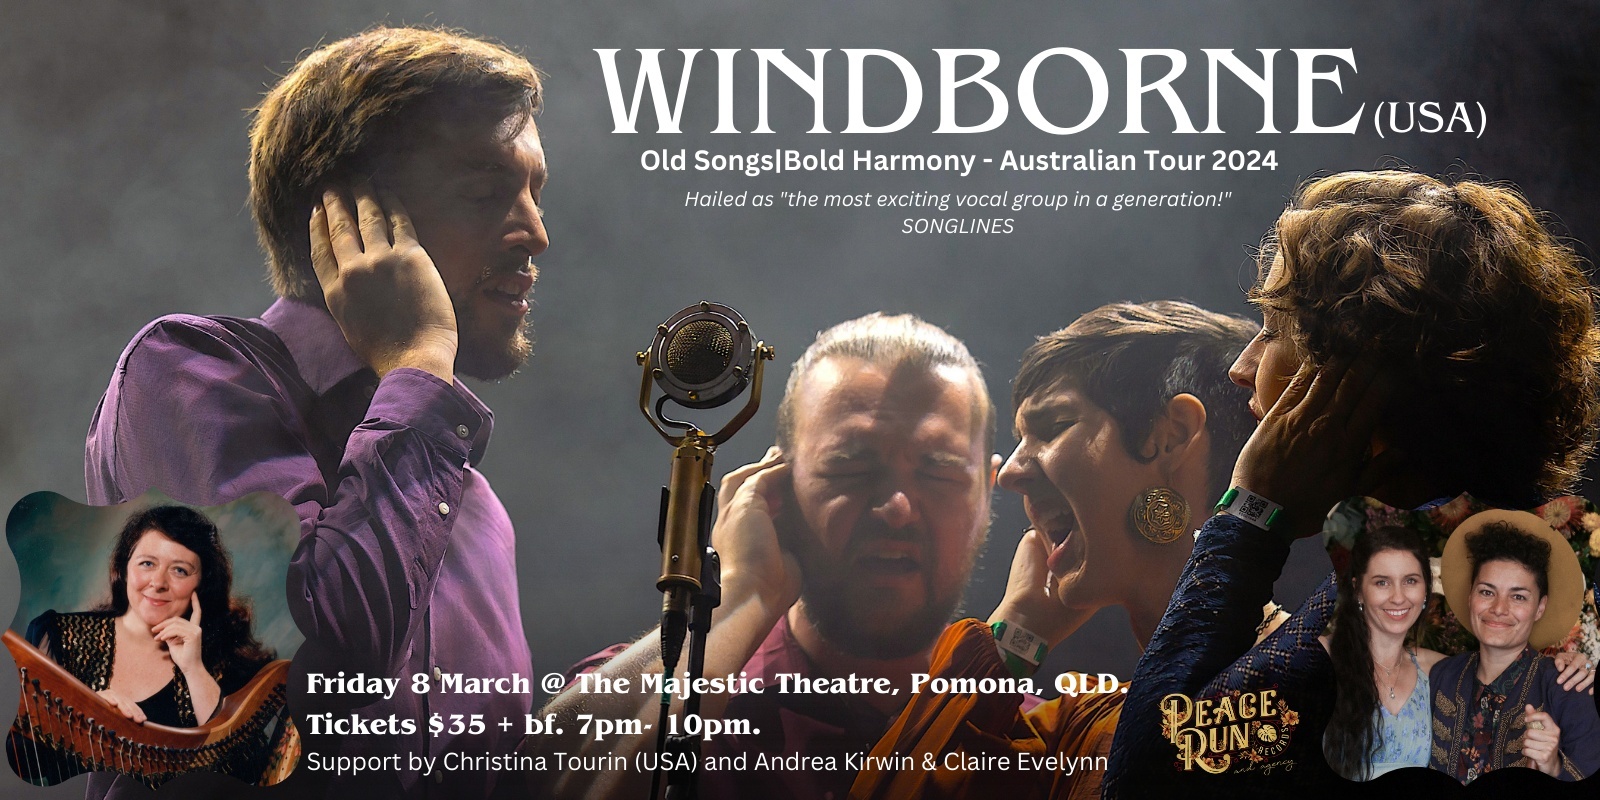 Banner image for Windborne (USA) supported by Christina Tourin (USA), Andrea Kirwin & Claire Evelynn - Majestic Theatre, Pomona